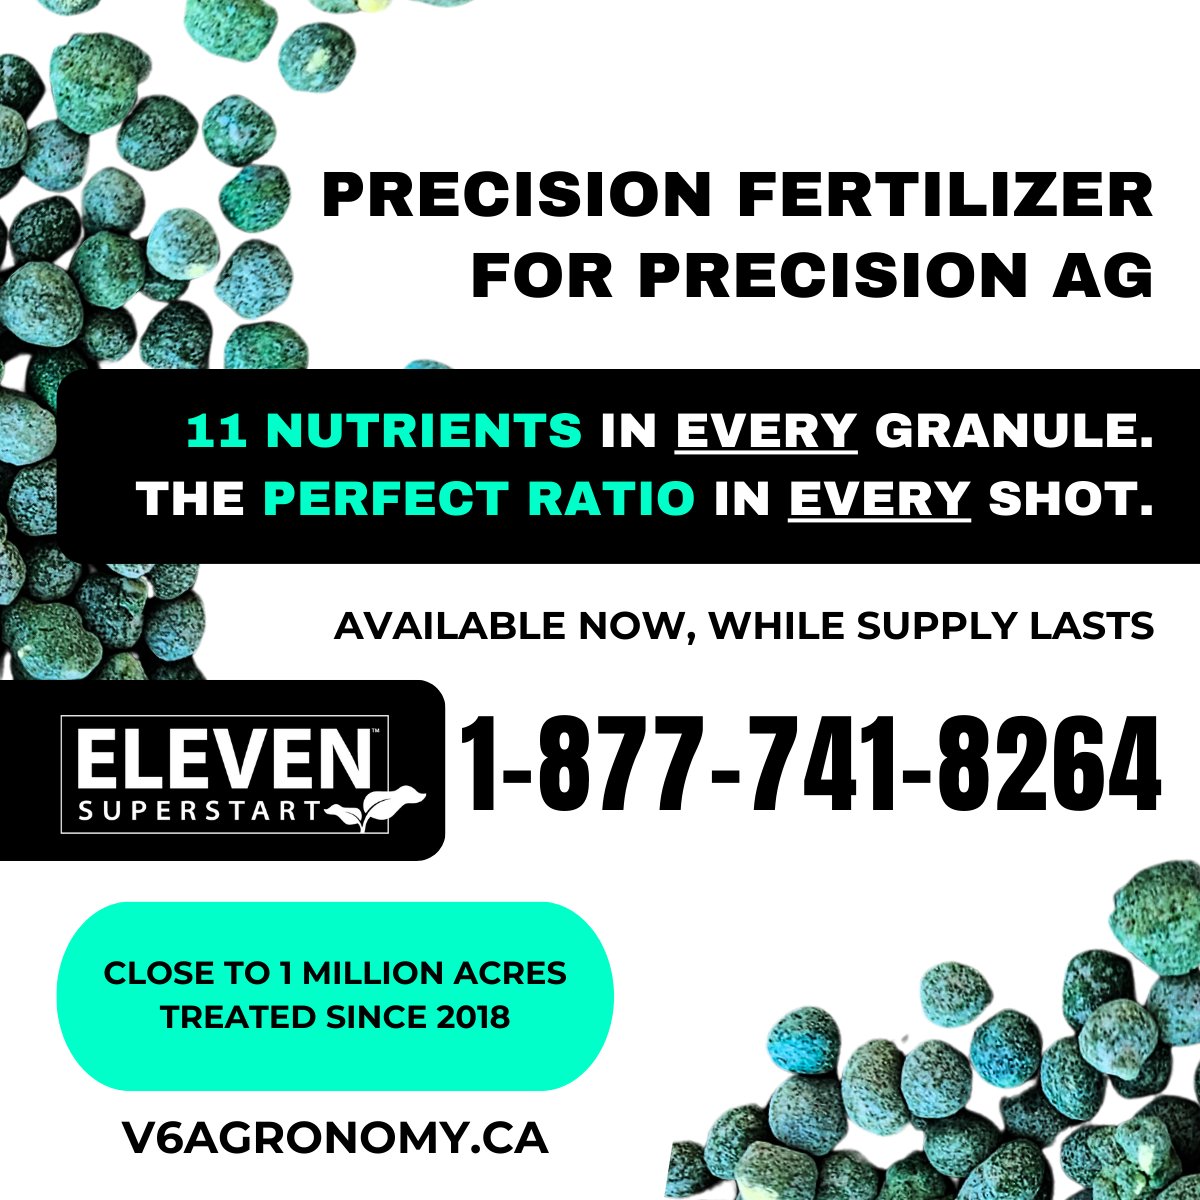 Need to top-up your #fertilizer for #seed2024? Give us a call. We have a limited quantity of 2024 #ElevenSuperstart ready to go! v6agronomy.ca
#Phosphate #CdnAg #seeding #farm #crops #precisionAg #agriculture #precisionseeding #agronomy #saskag